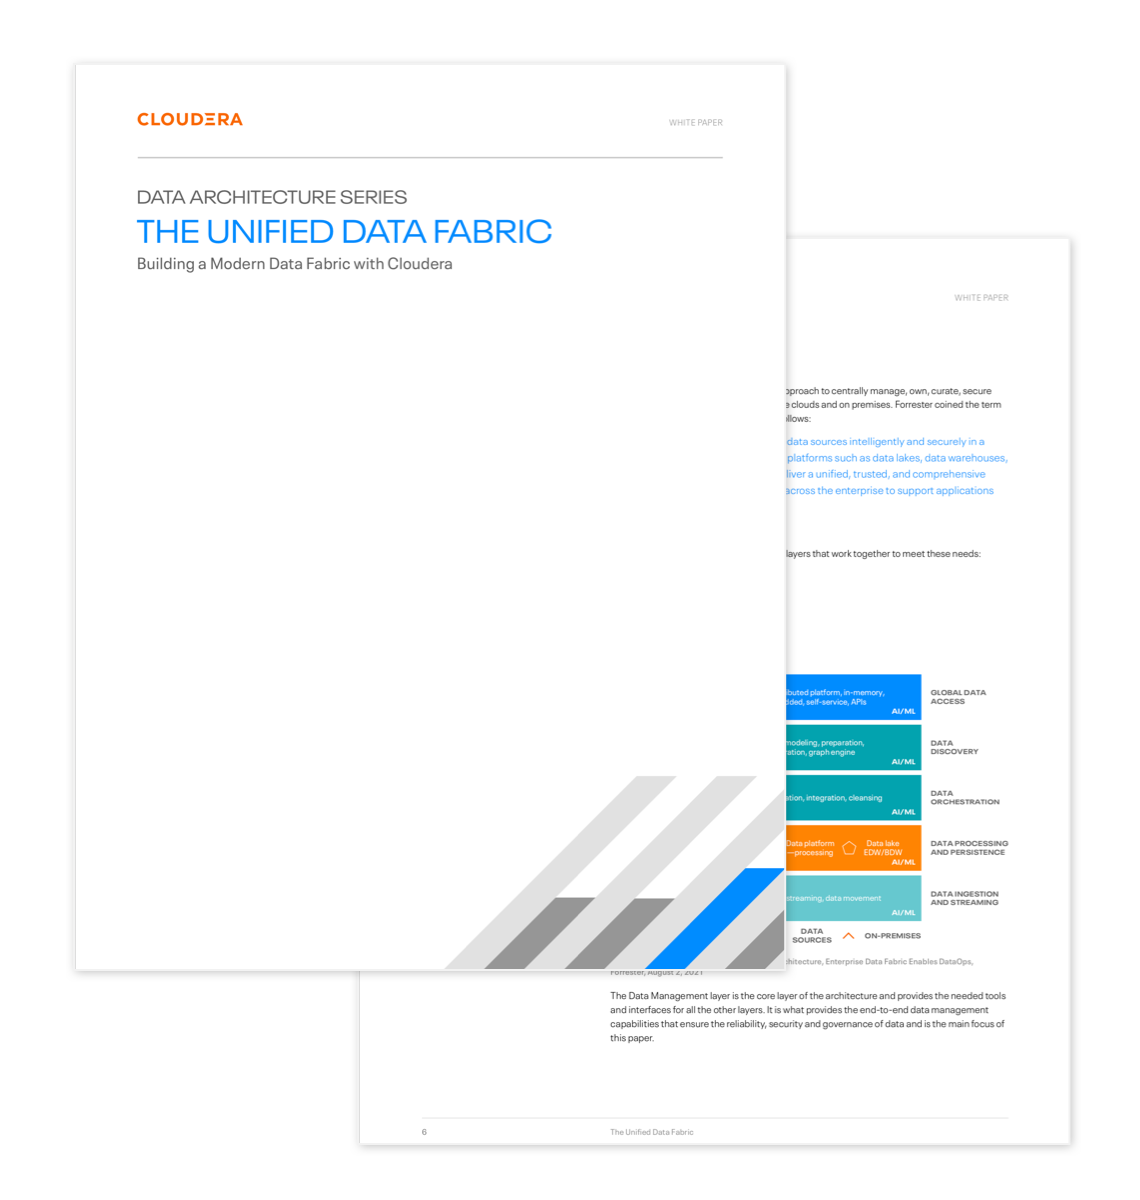 Data Architecture Series - The unified data fabric